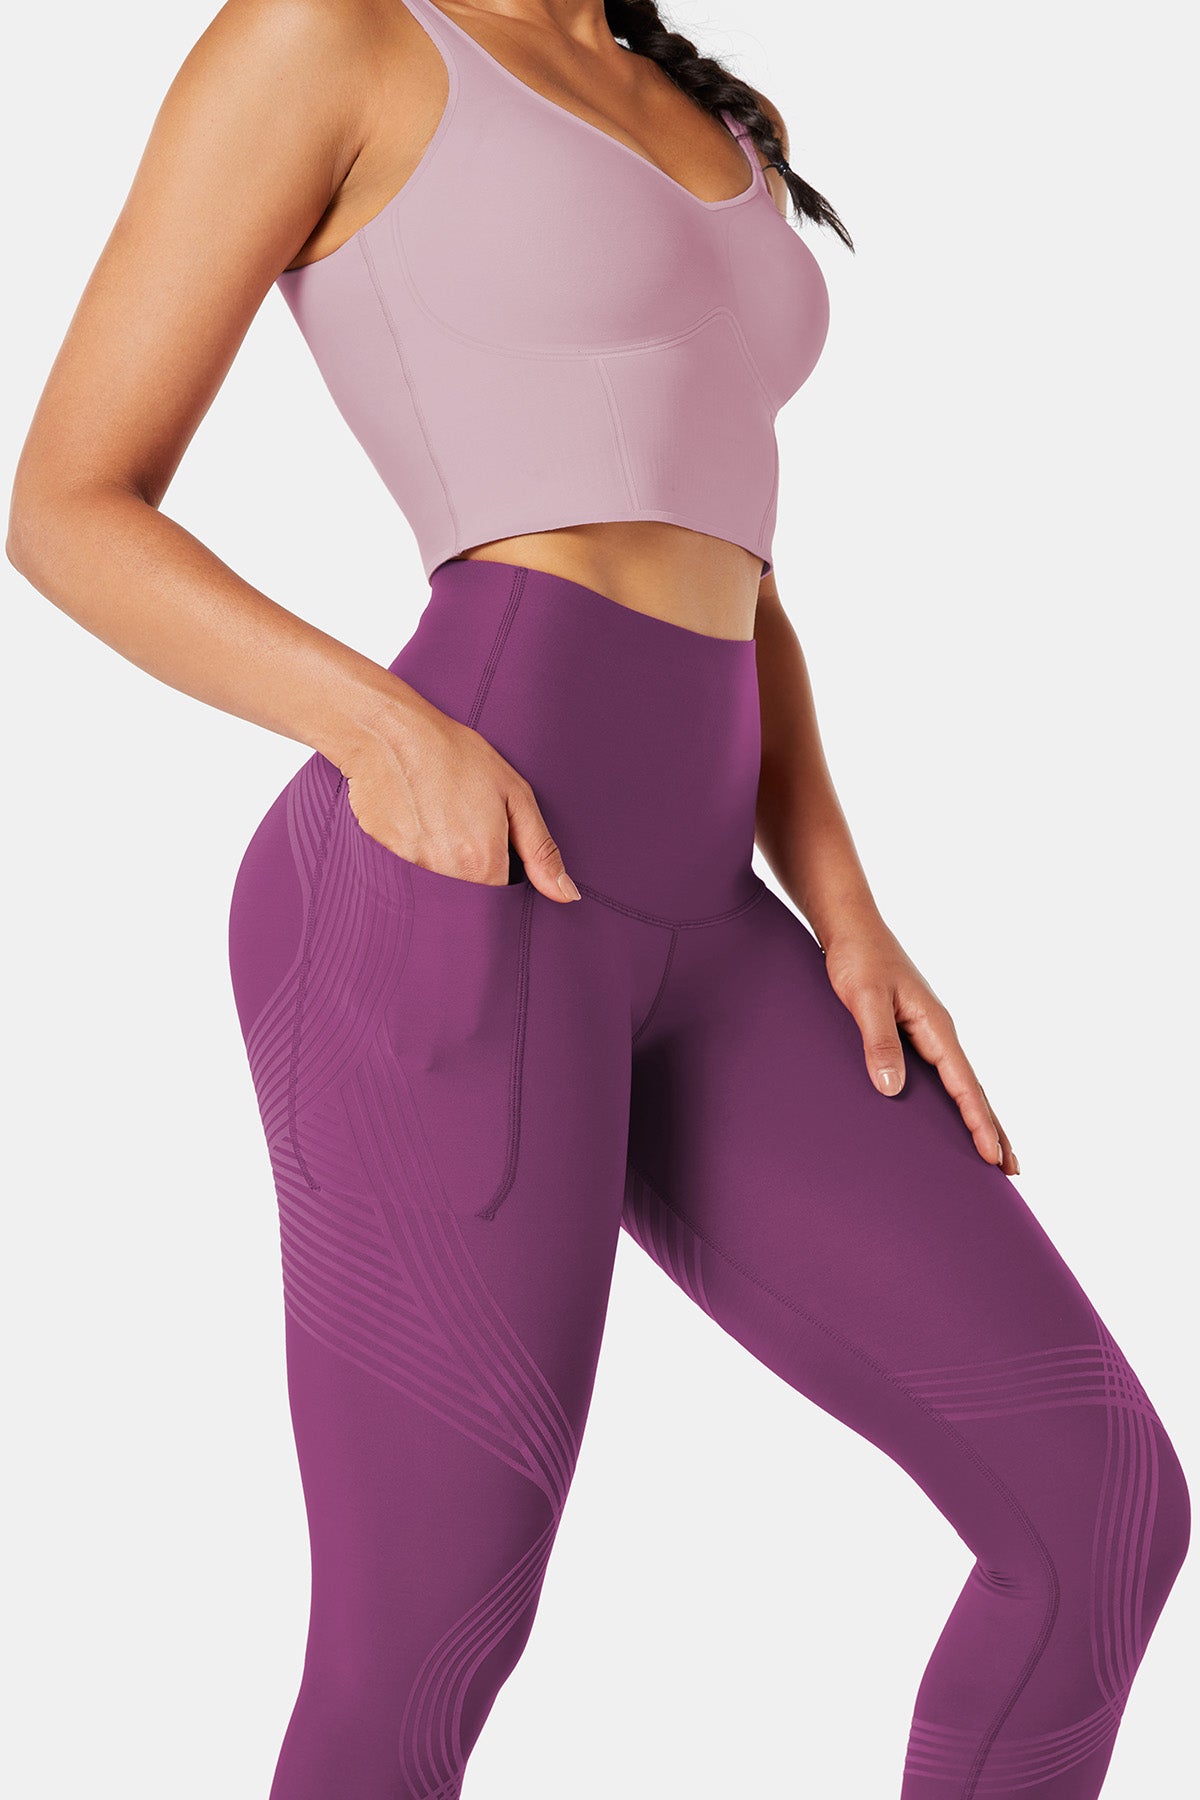 Find the Best Functional Leggings That Deal with Cellulite, Varicose V –  Fanka